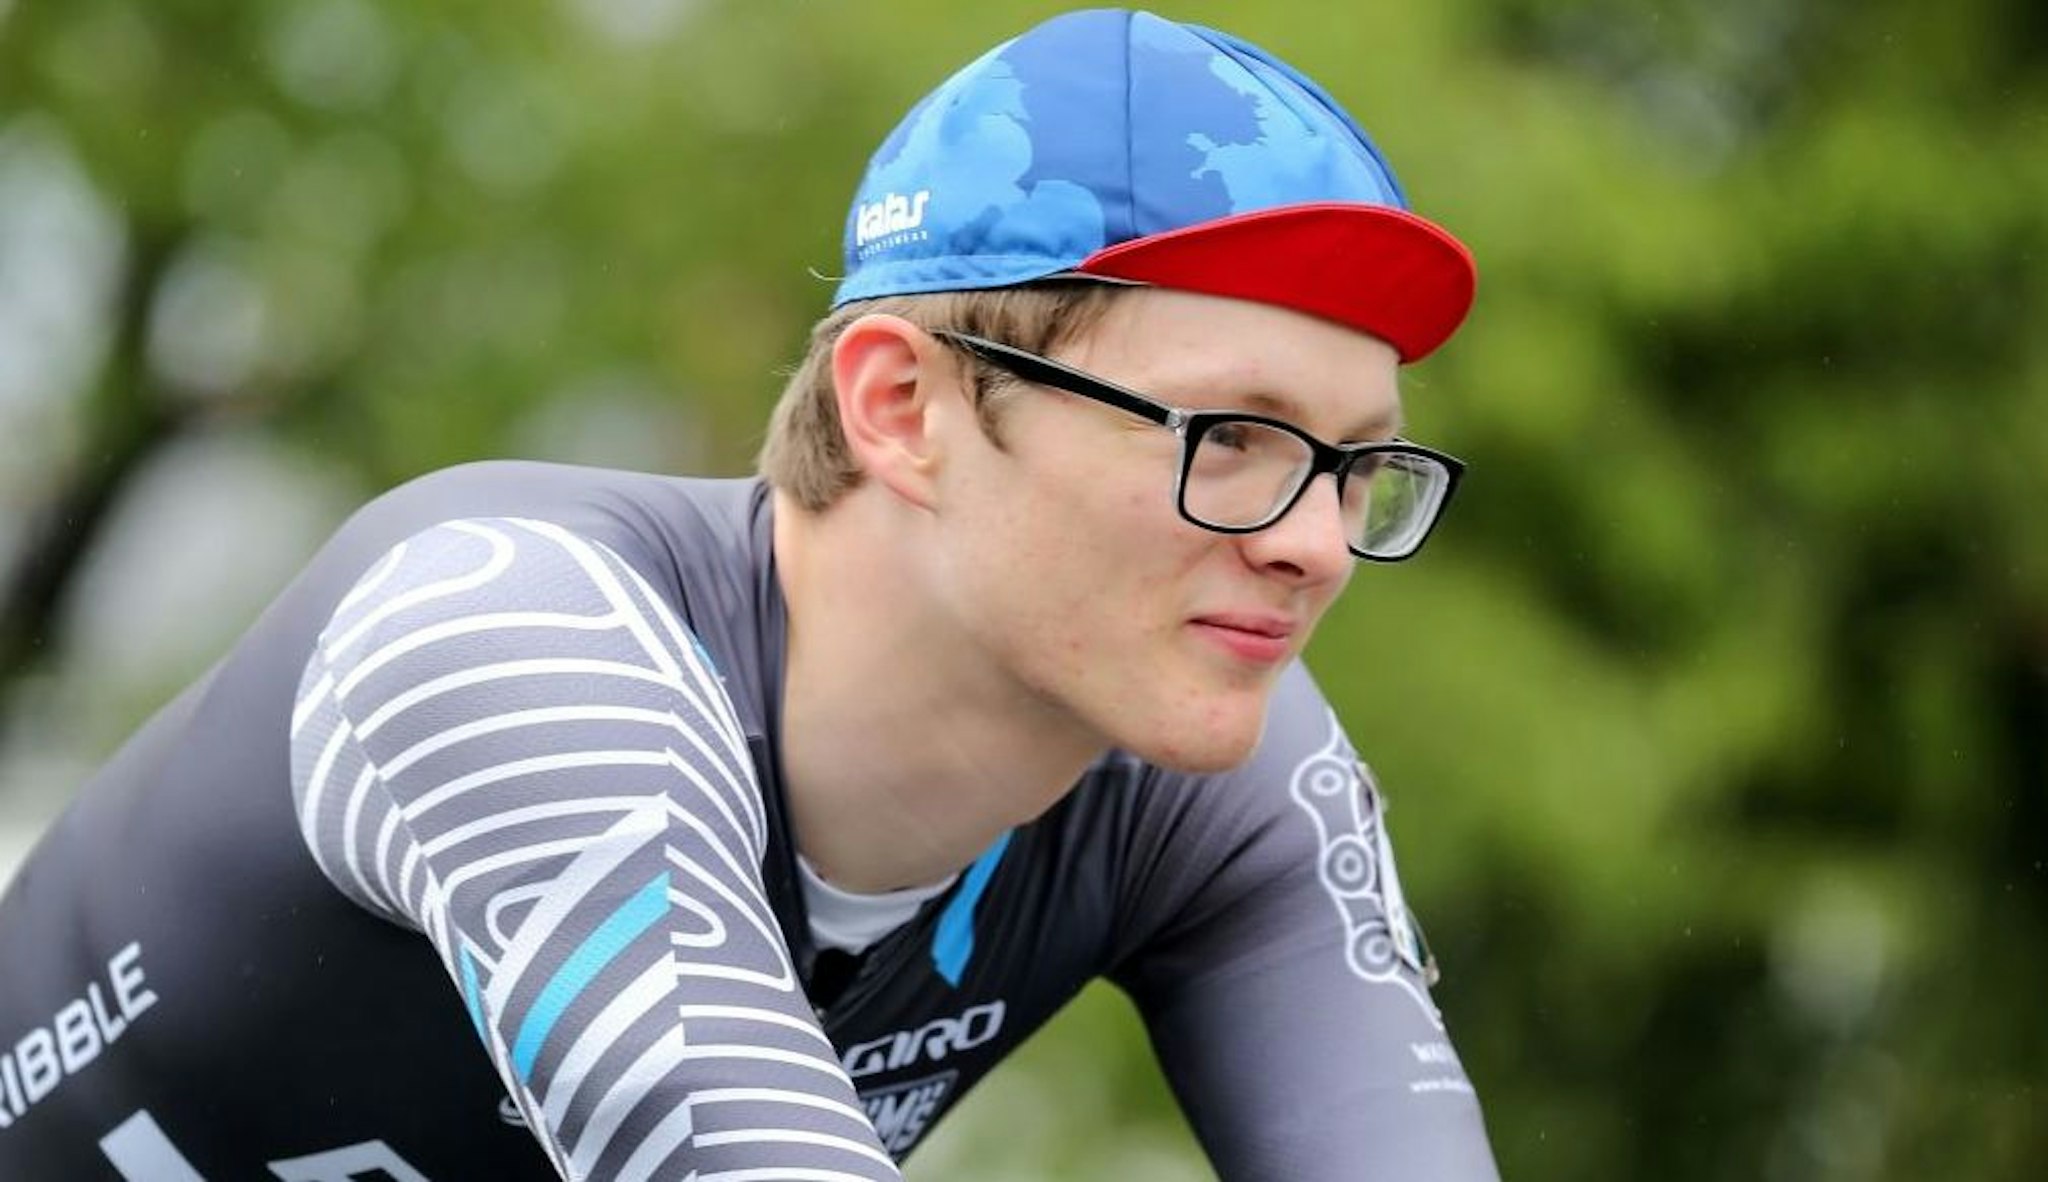 Zach Bridges prepares to race in stage 5 of the Junior tour of Wales on August 26, 2018 in Abergavenny, Wales, United Kingdom. In October 2020 Zach Bridges the 19-year-old, from Cwmbran in Wales, came out as transgender and now identifies as Emily Bridges.